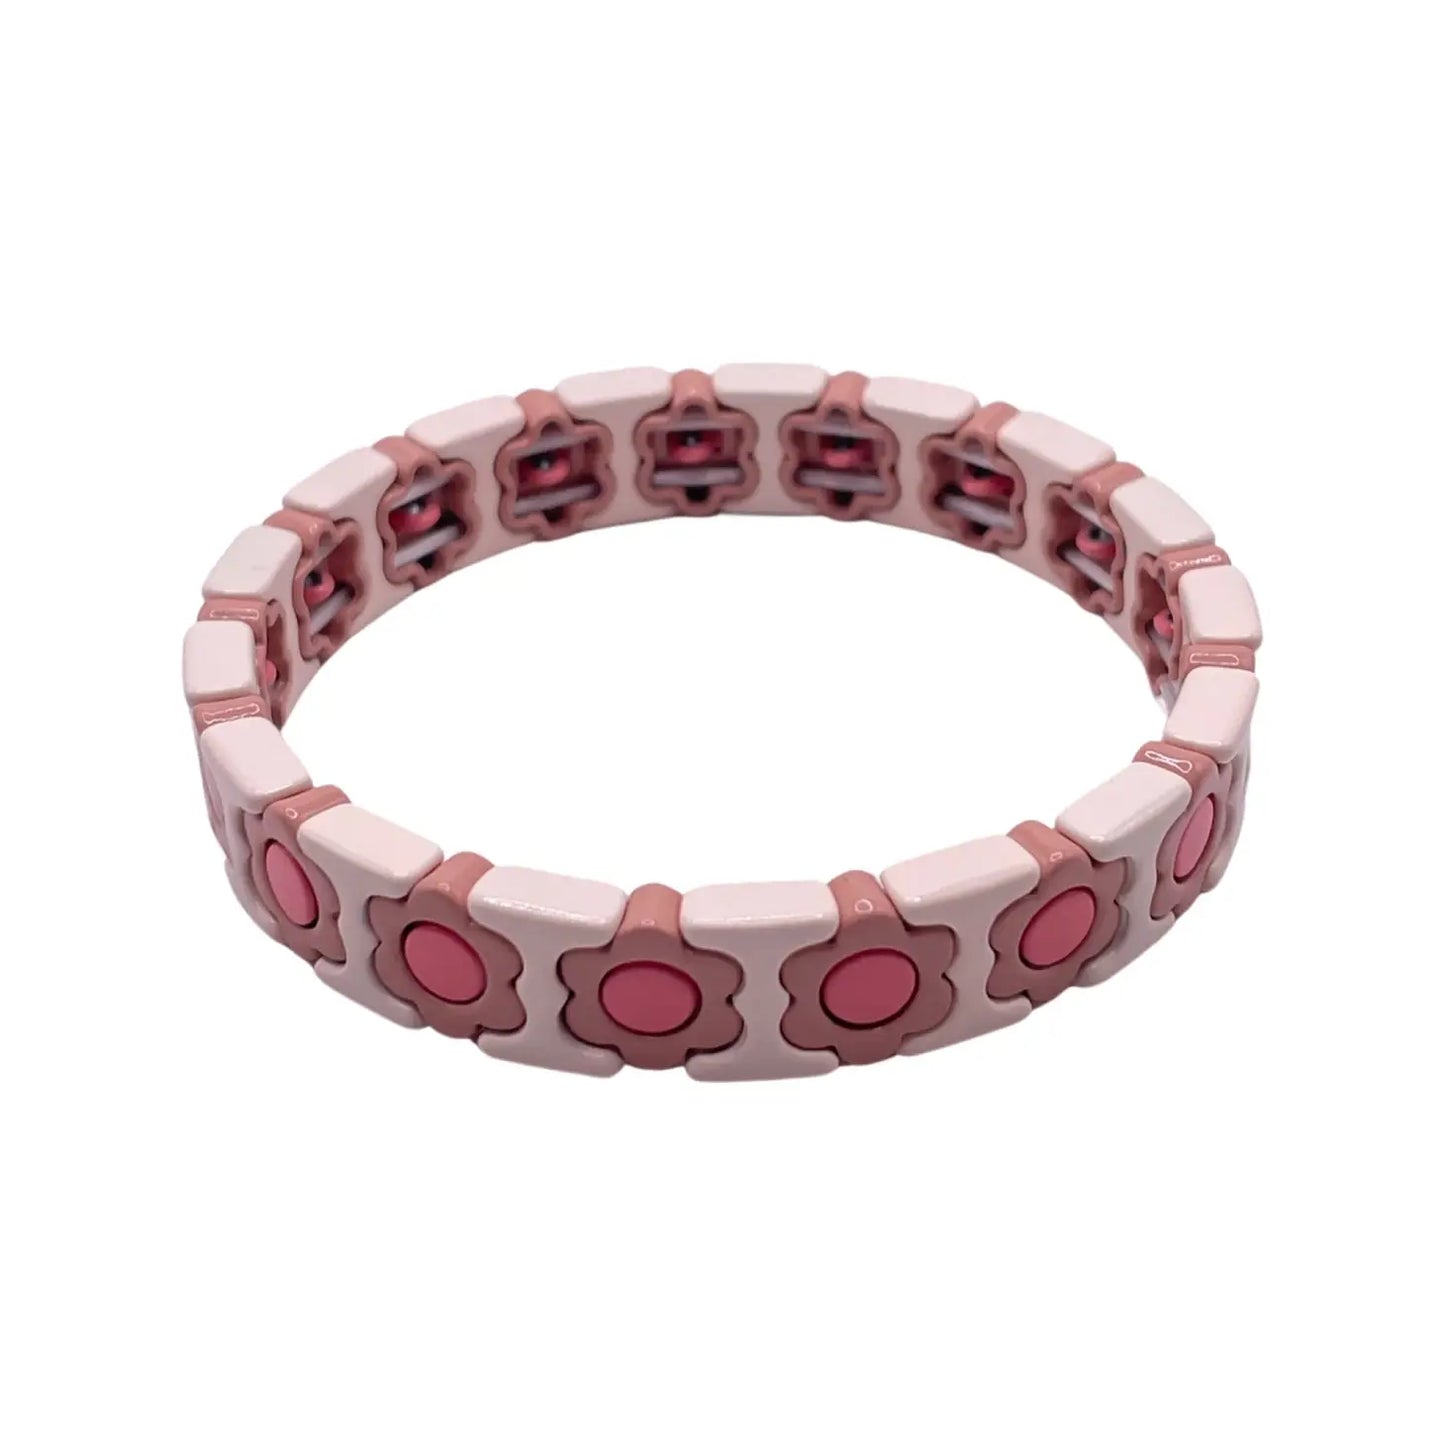 Pinks Floral Bracelet - Curated Home Decor